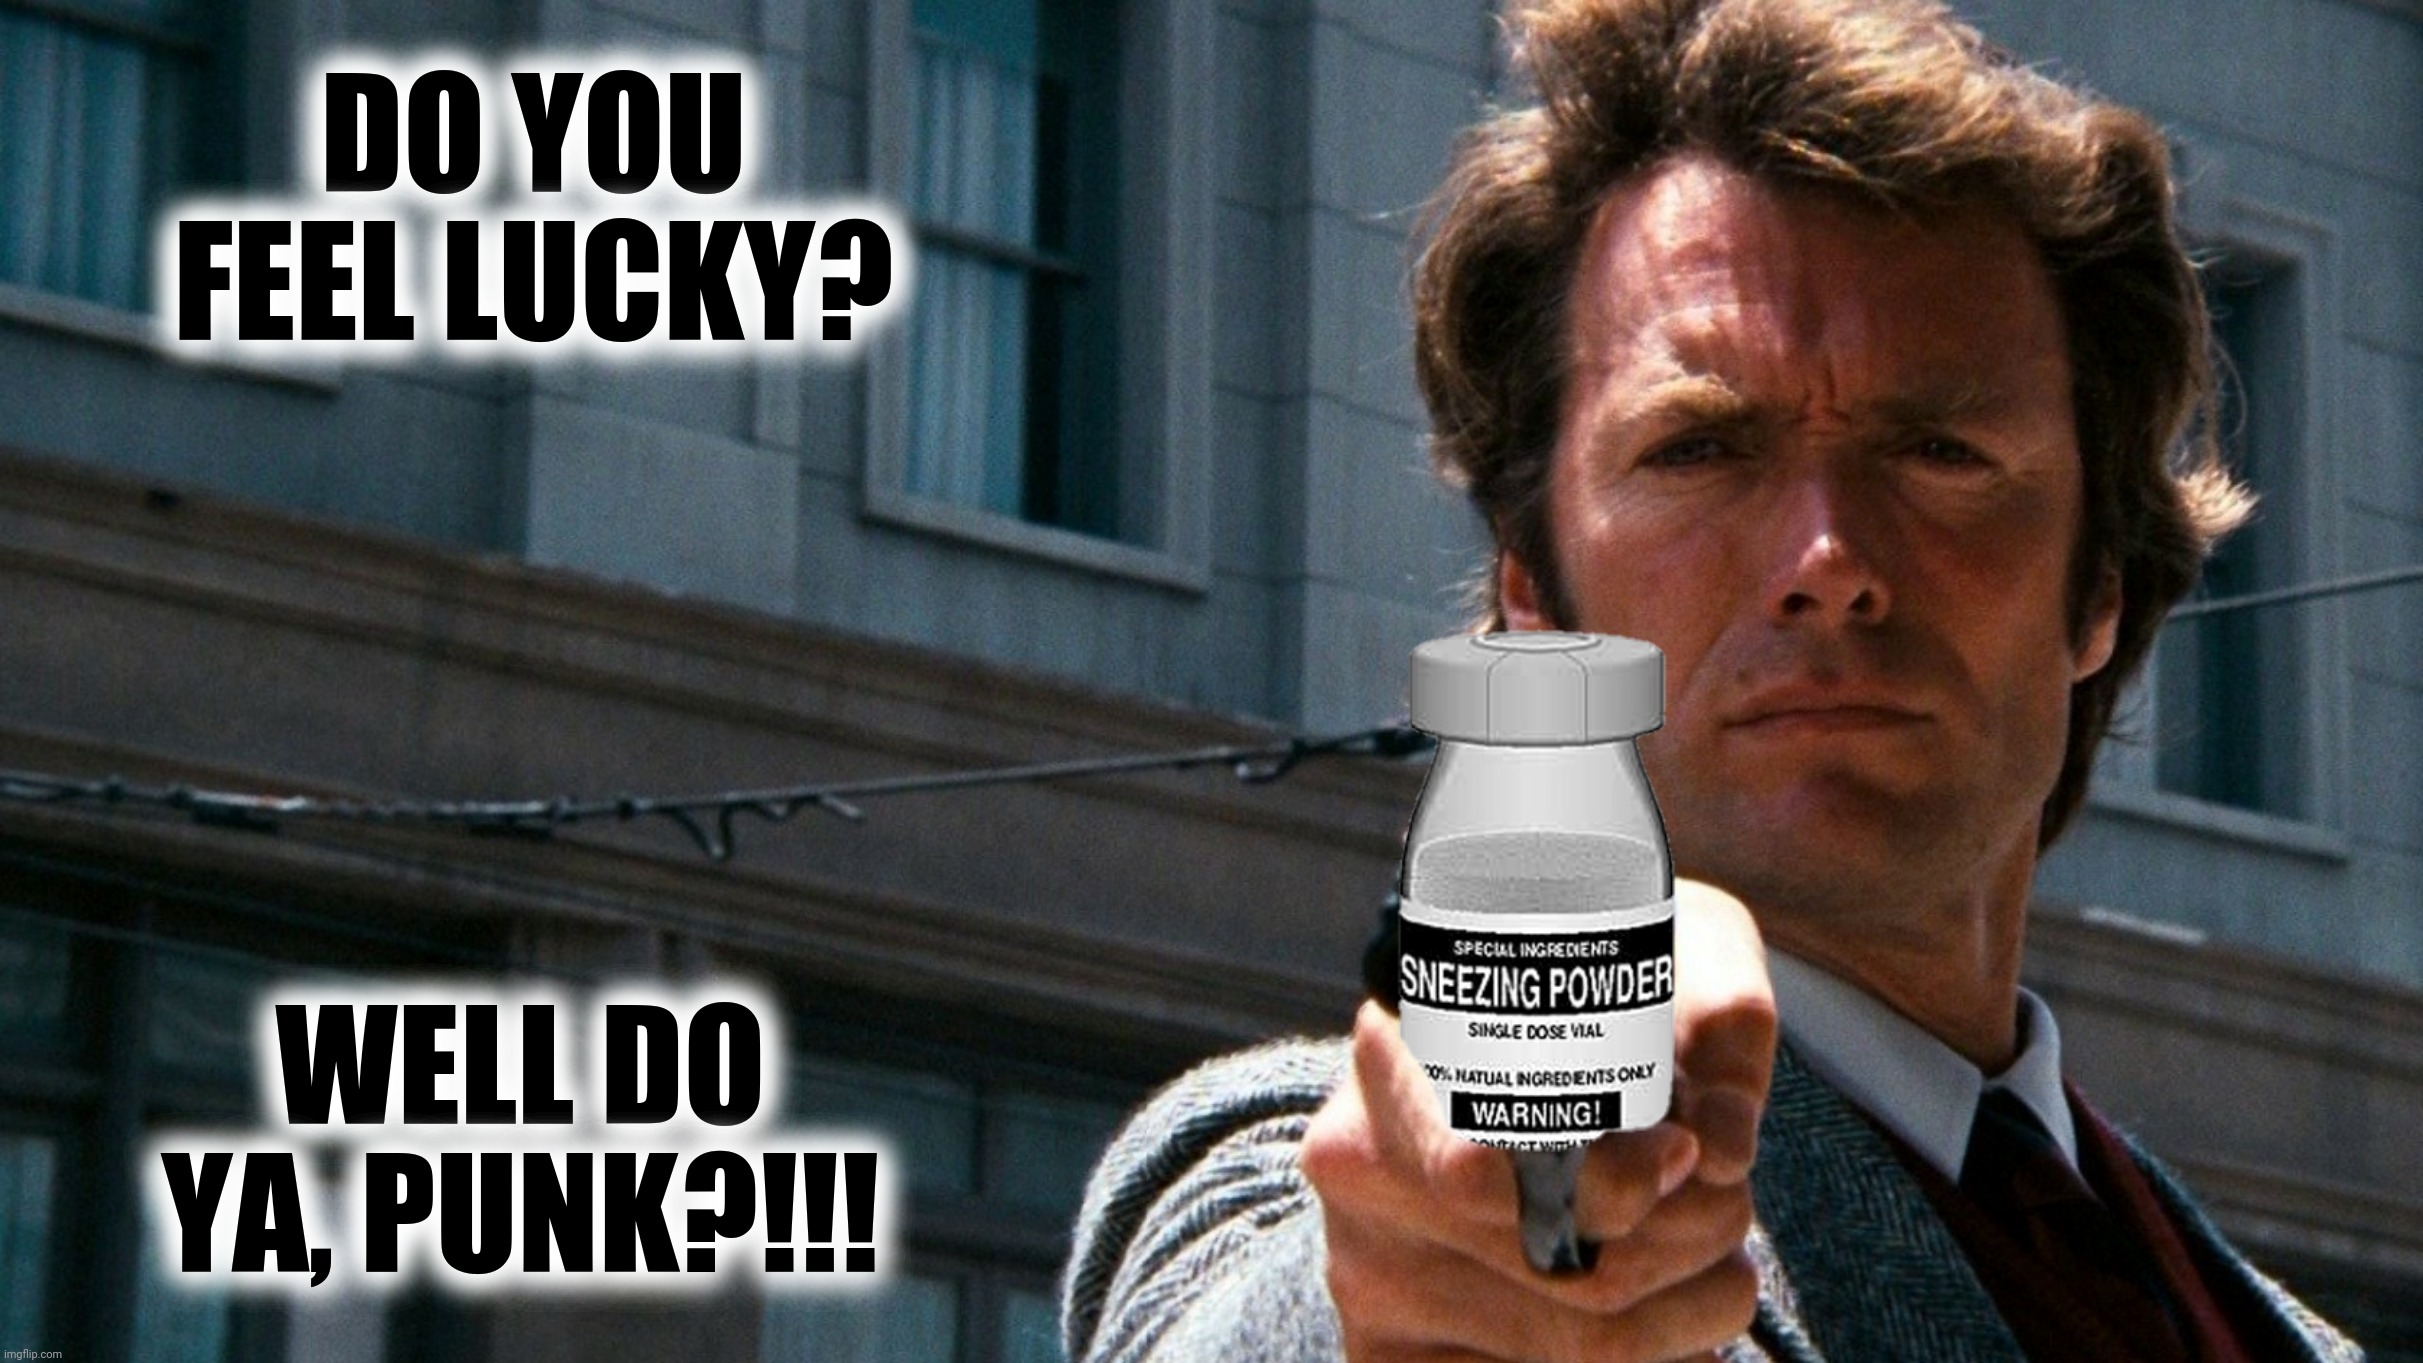 Bad Photoshop Sunday presents: But being this is the most powerful sneezing powder in the world and would blow my nose clean off | DO YOU FEEL LUCKY? WELL DO YA, PUNK?!!! | image tagged in bad photoshop sunday,dirty harry,covid-19,sneezing powder | made w/ Imgflip meme maker